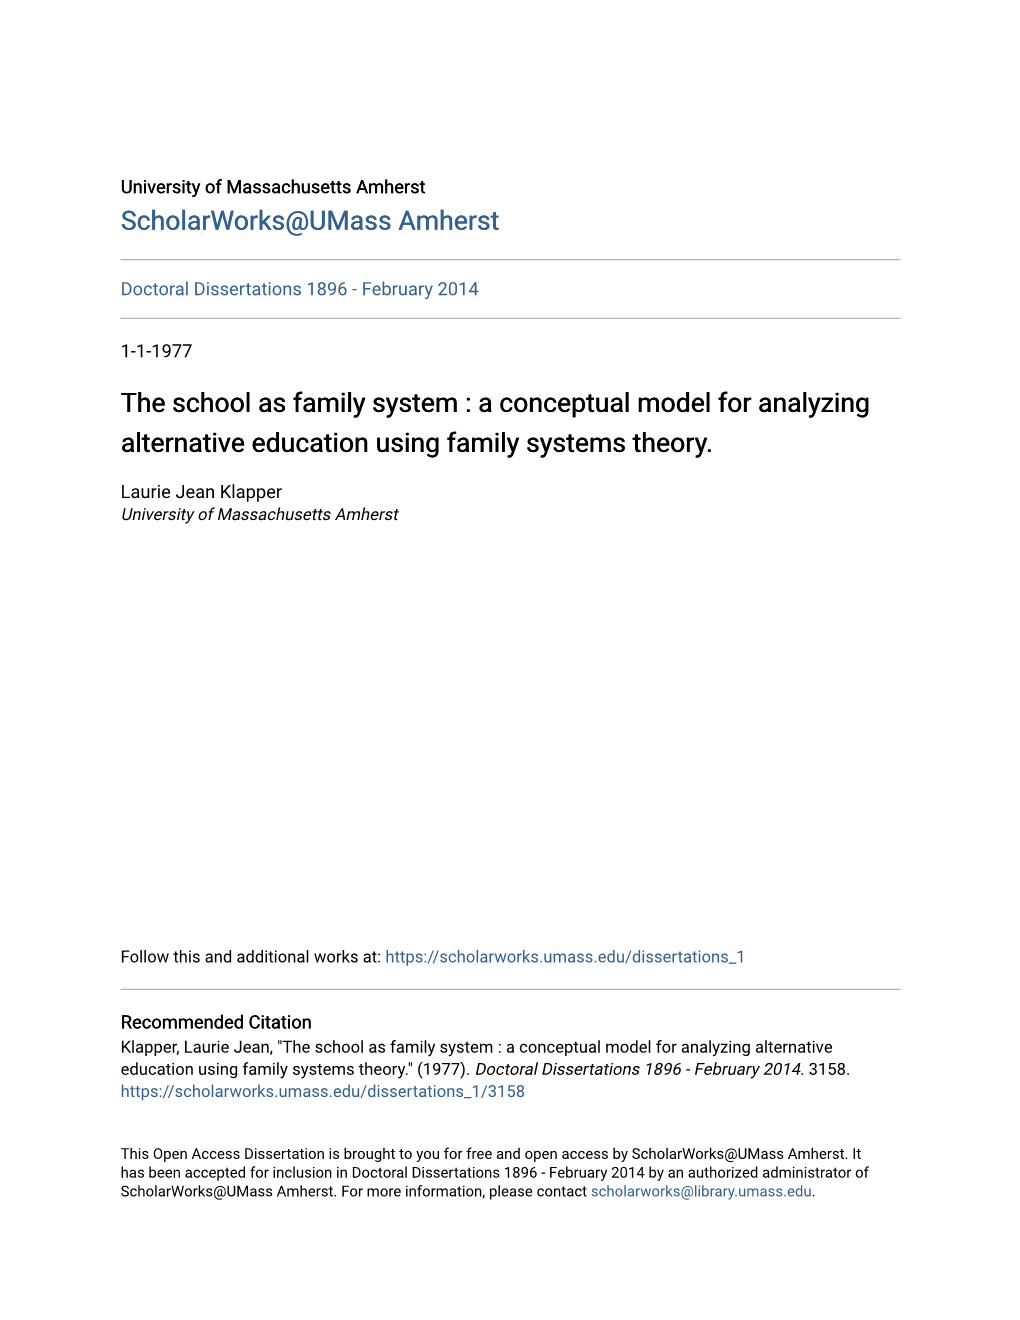 The School As Family System : a Conceptual Model for Analyzing Alternative Education Using Family Systems Theory